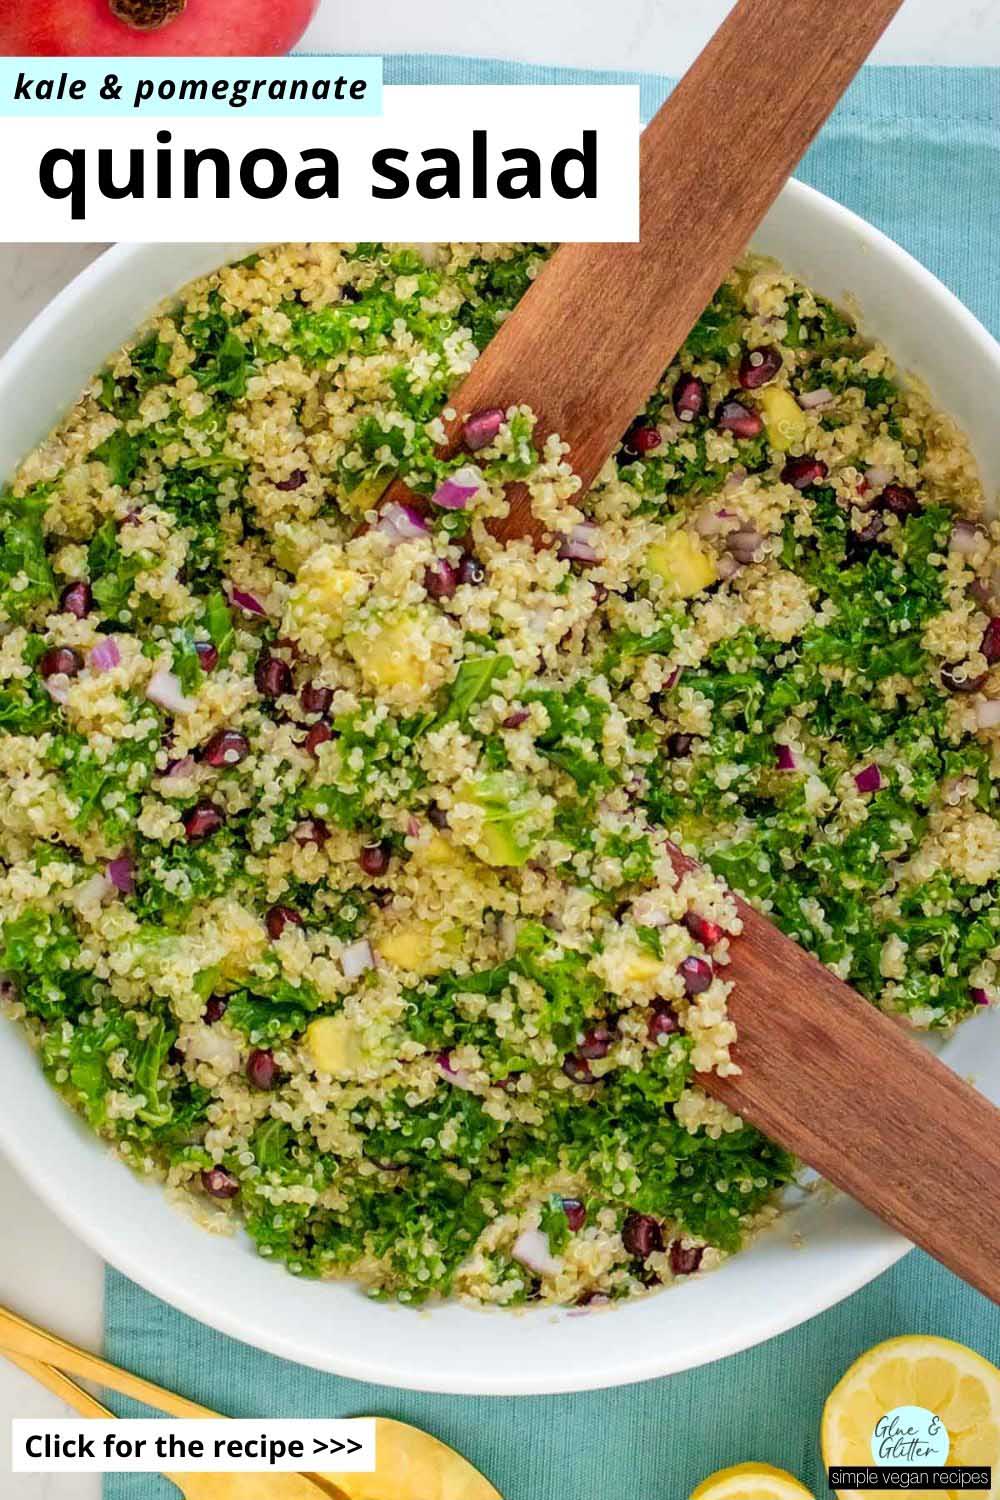 serving bowl of quinoa salad with kale and pomegranate seeds, text overlay